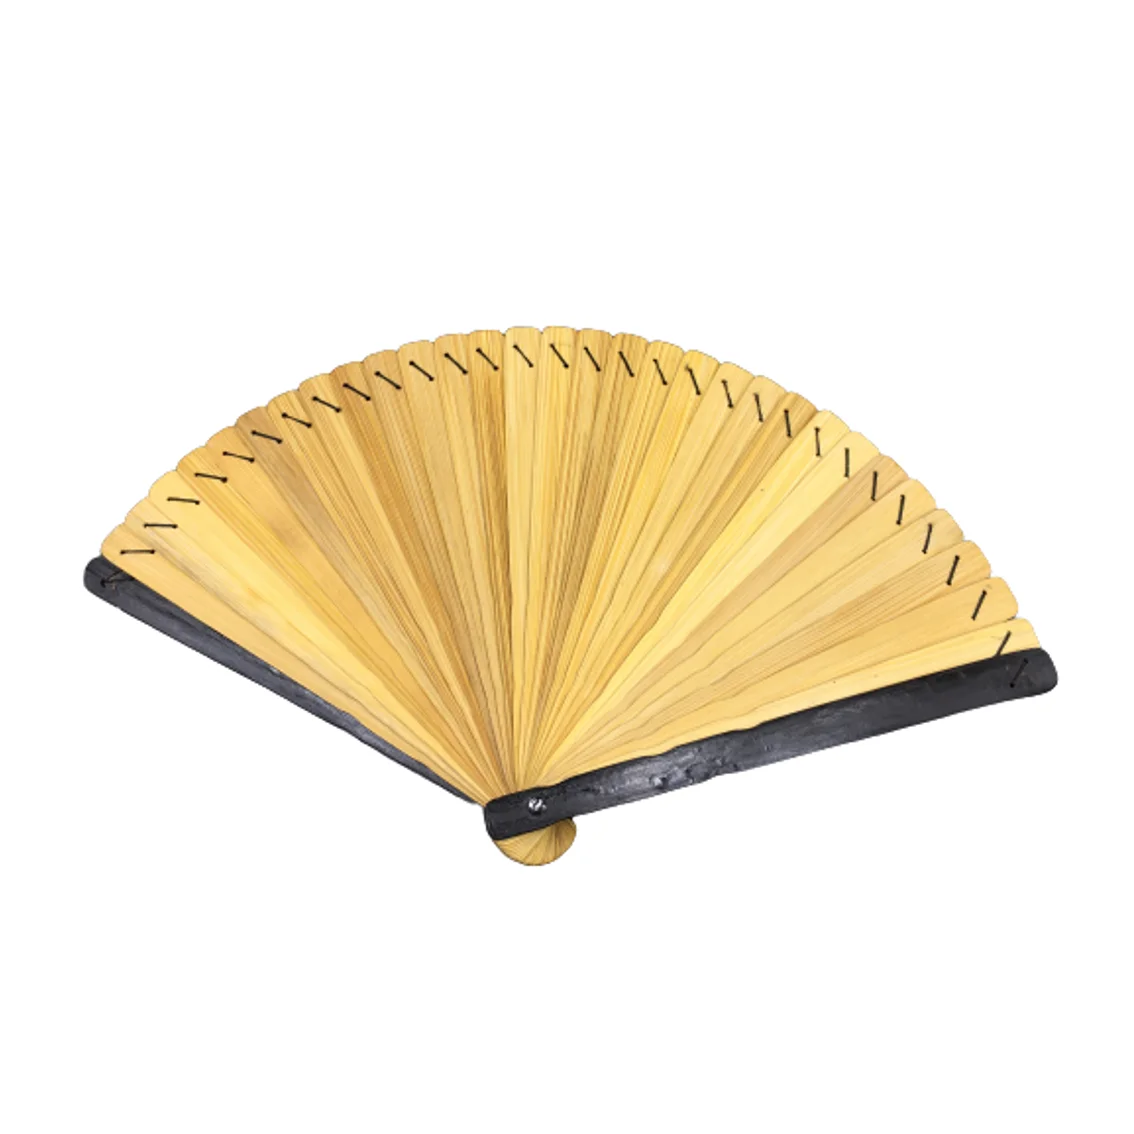 Hand Held Fan With Outer Bamboo Case From Bamboo For Decoration Or